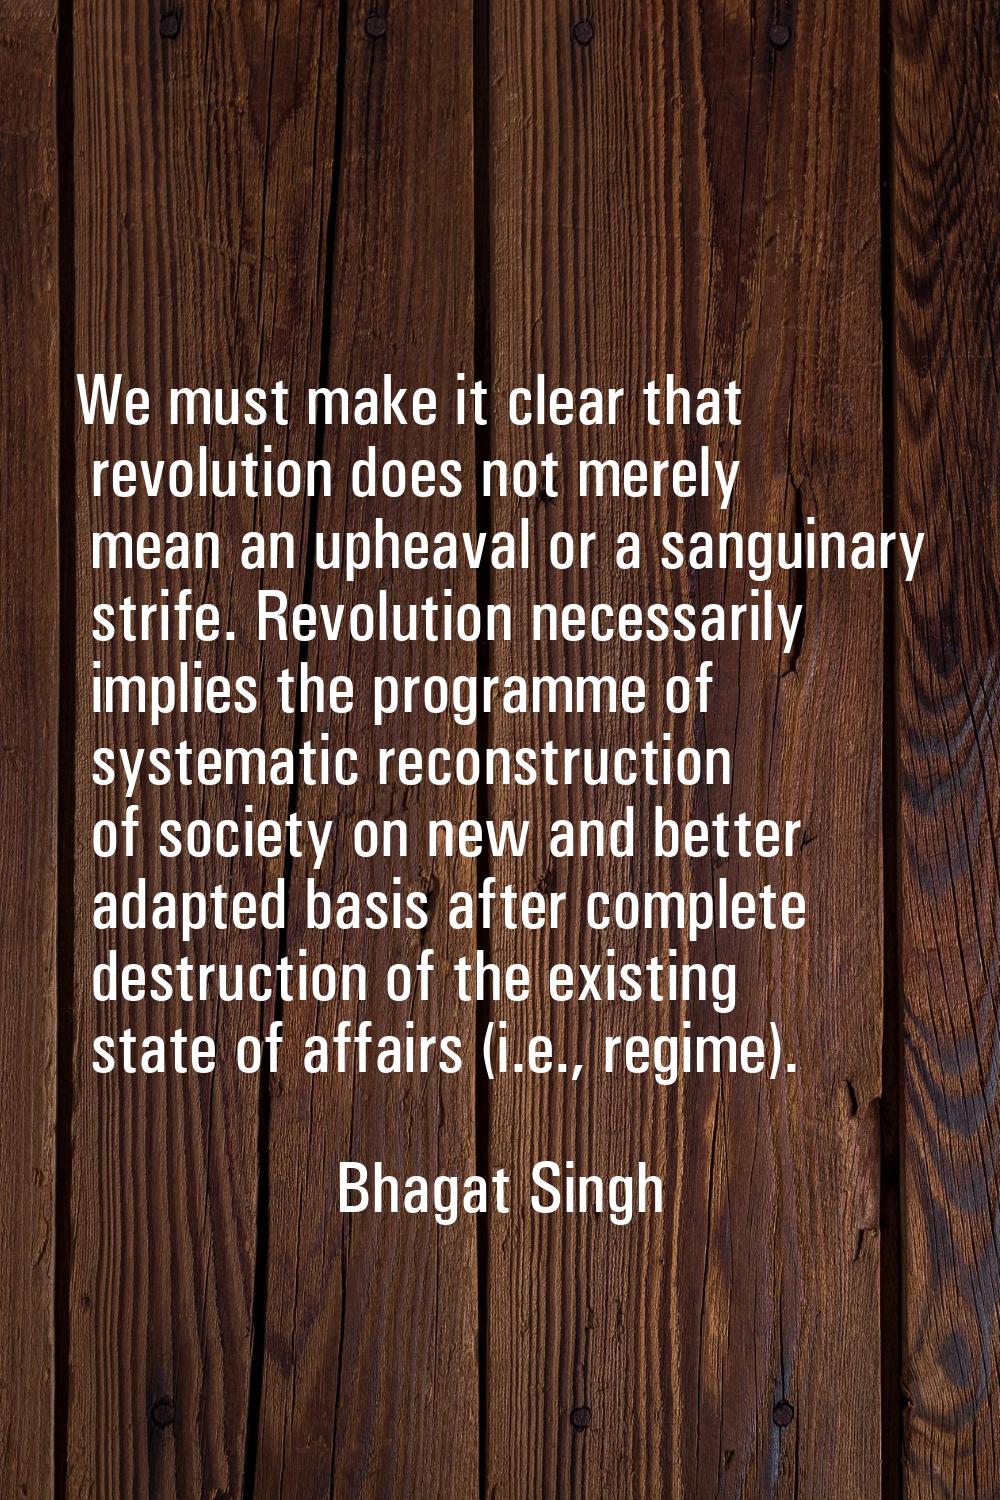 We must make it clear that revolution does not merely mean an upheaval or a sanguinary strife. Revo